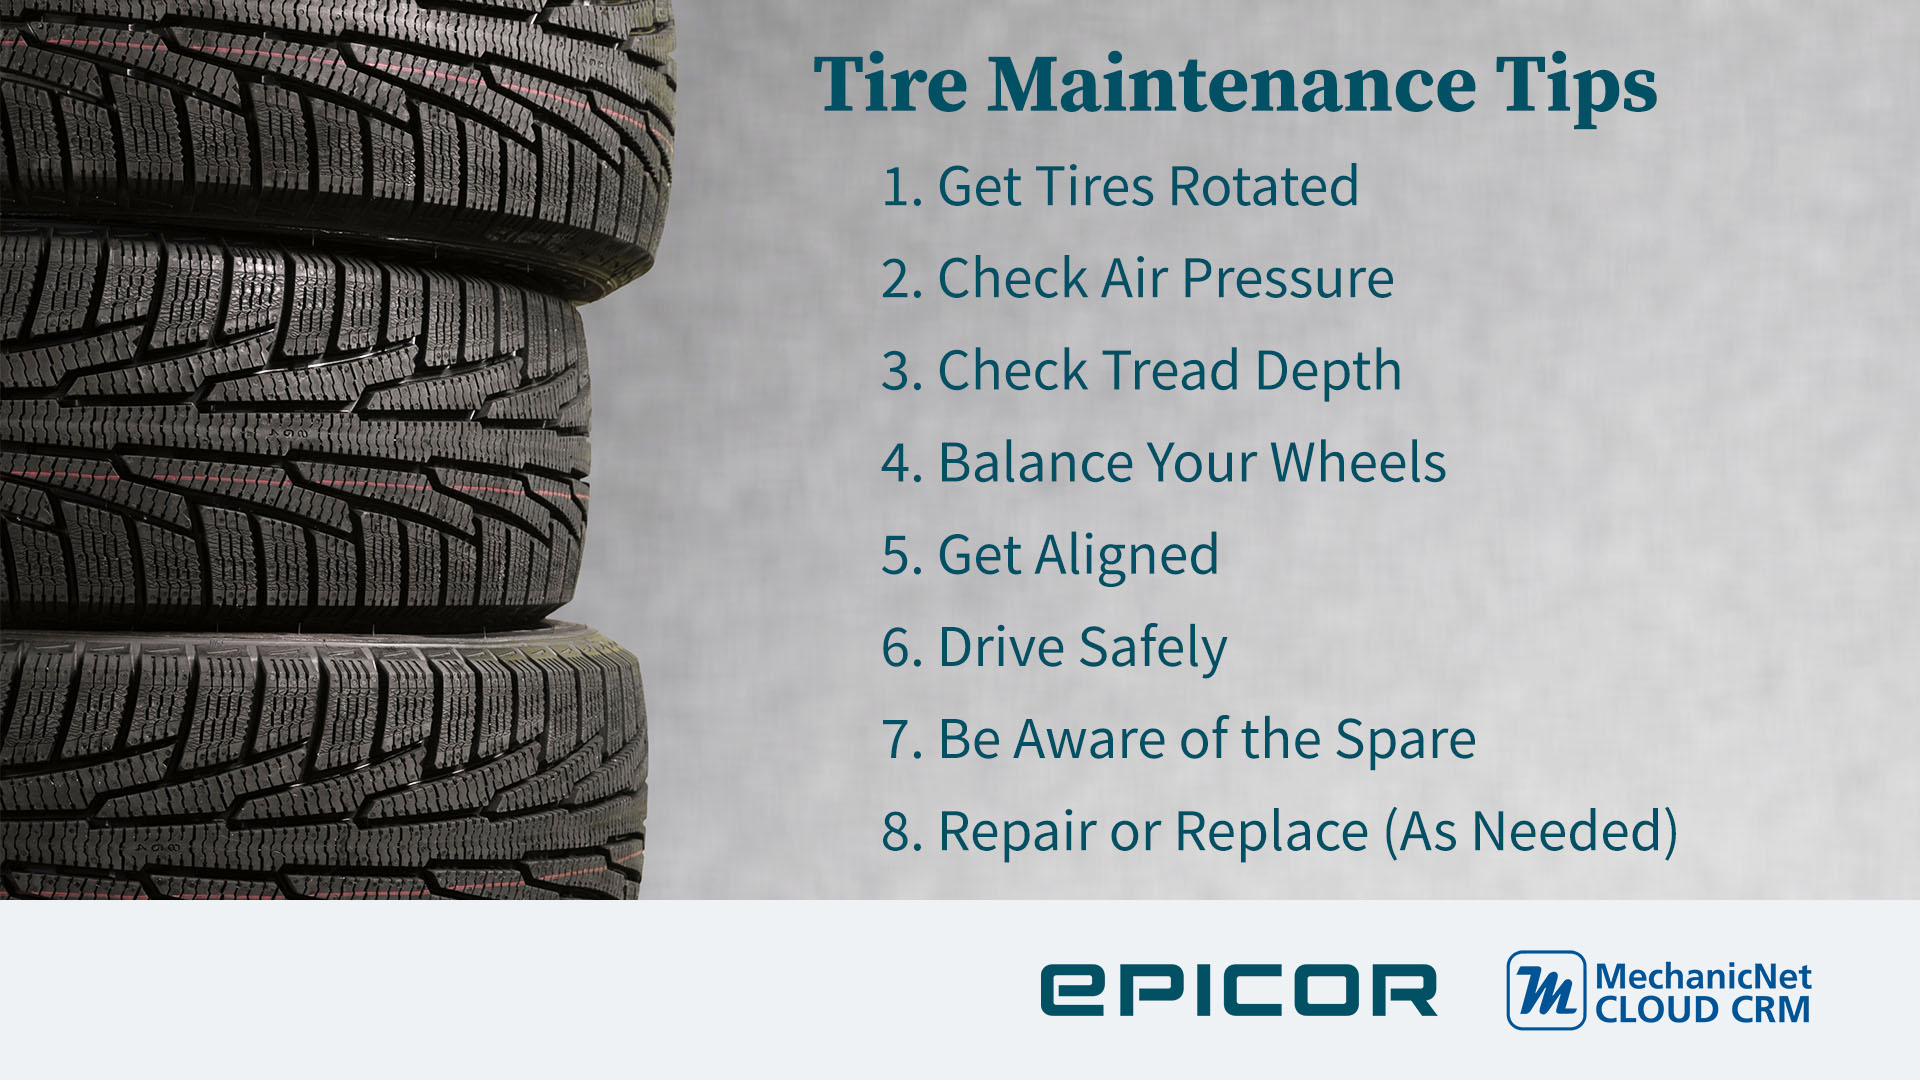 Tire maintenance tips 1. get tires rotated 2. check air pressure 3. check tread depth 4. balance your wheels 5. get aligned 6. drive safely 7. be aware of the spare 8. repair or replace (as needed)